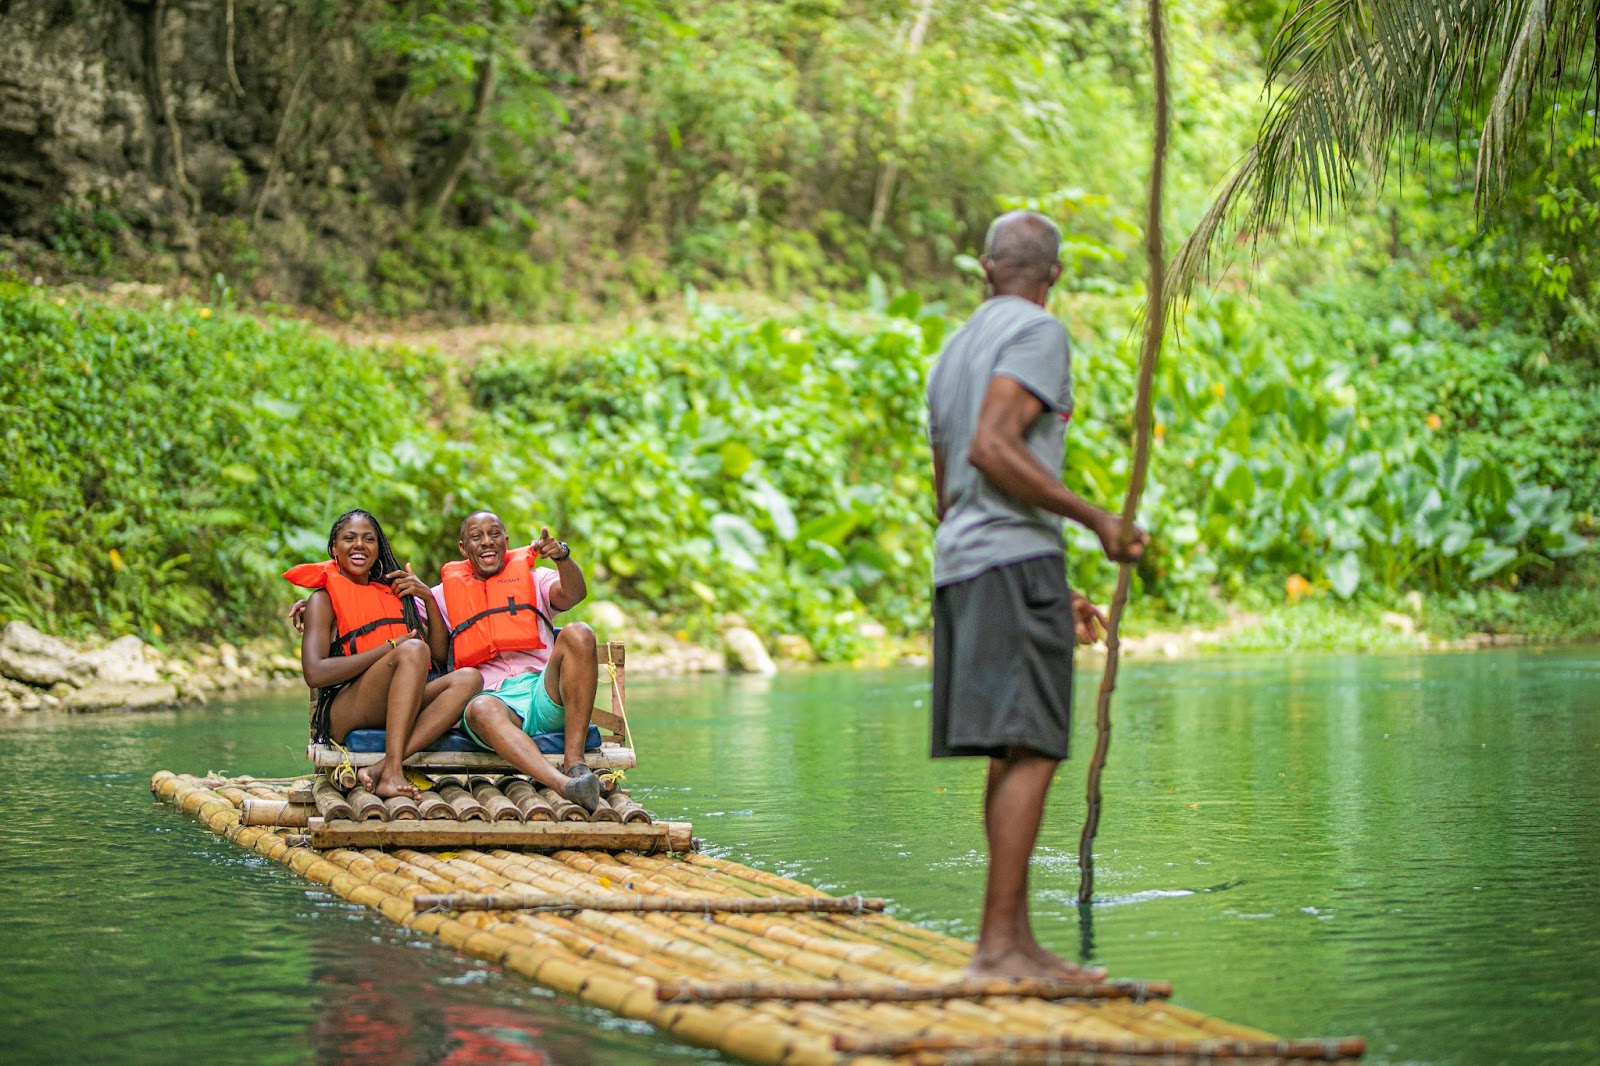 An exciting adventure along the Black River in Jamaica. Witness the wild side of Jamaica on this thrilling river journey.